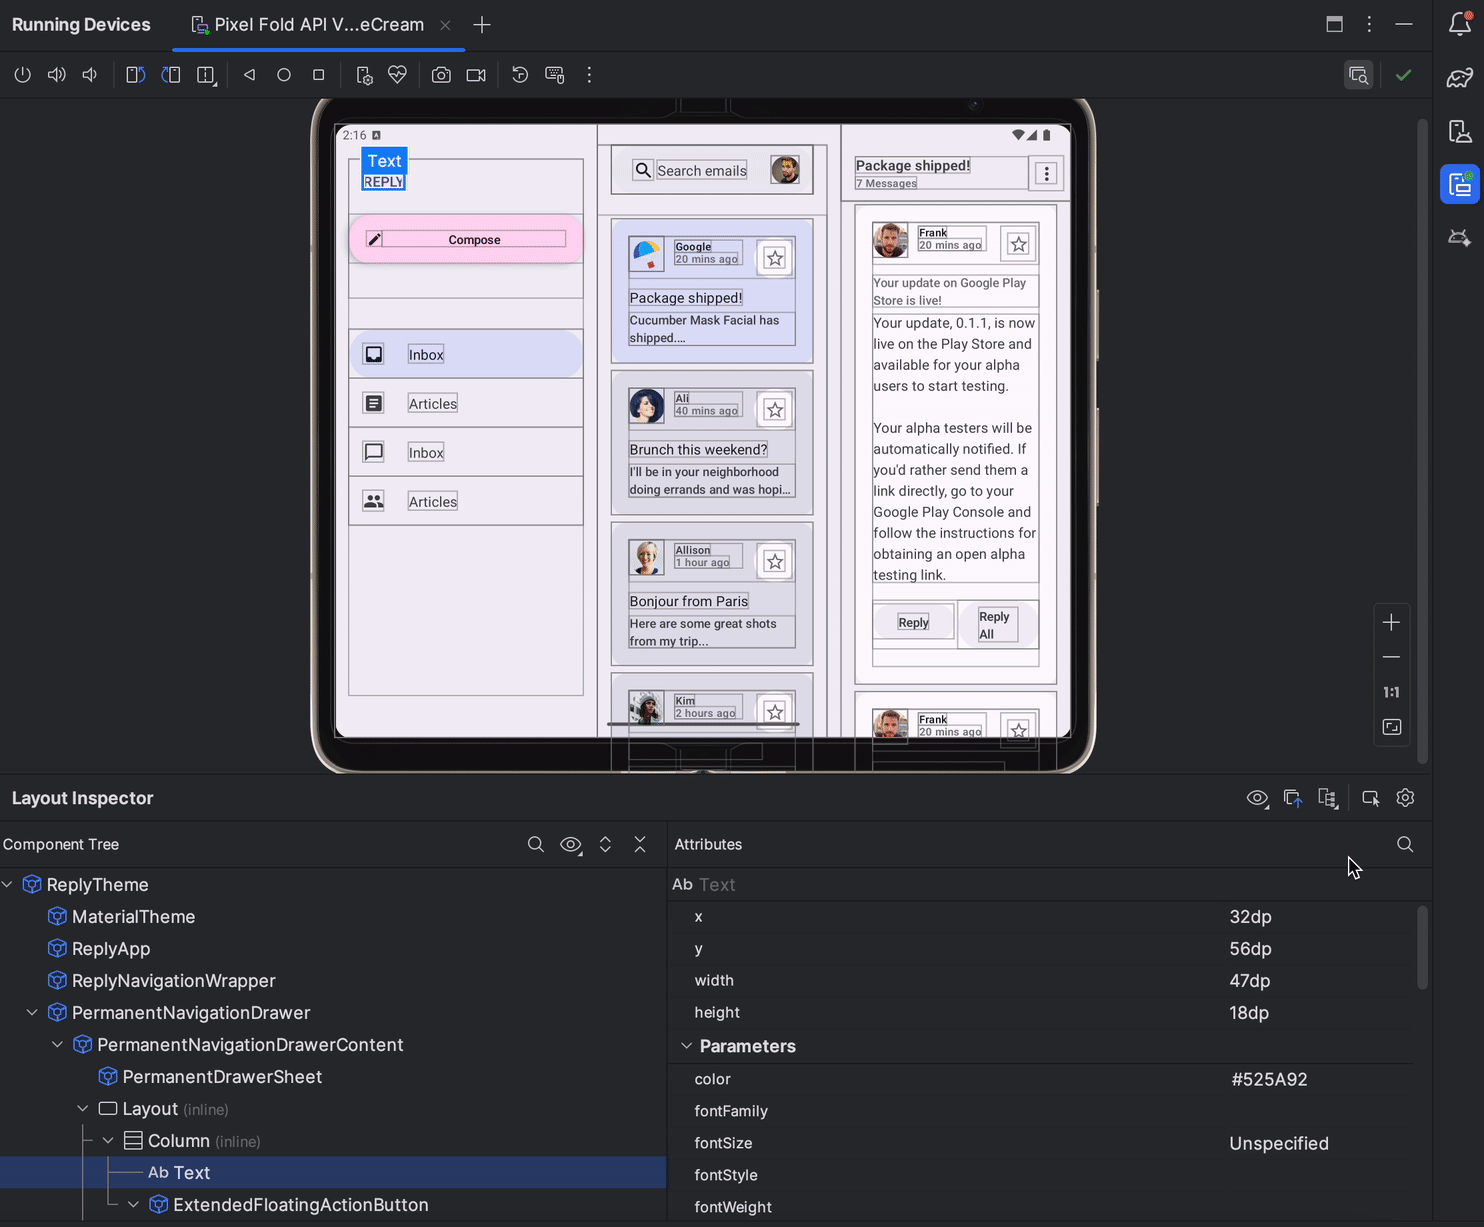 Layout checker included with Pixel Fold Emulator